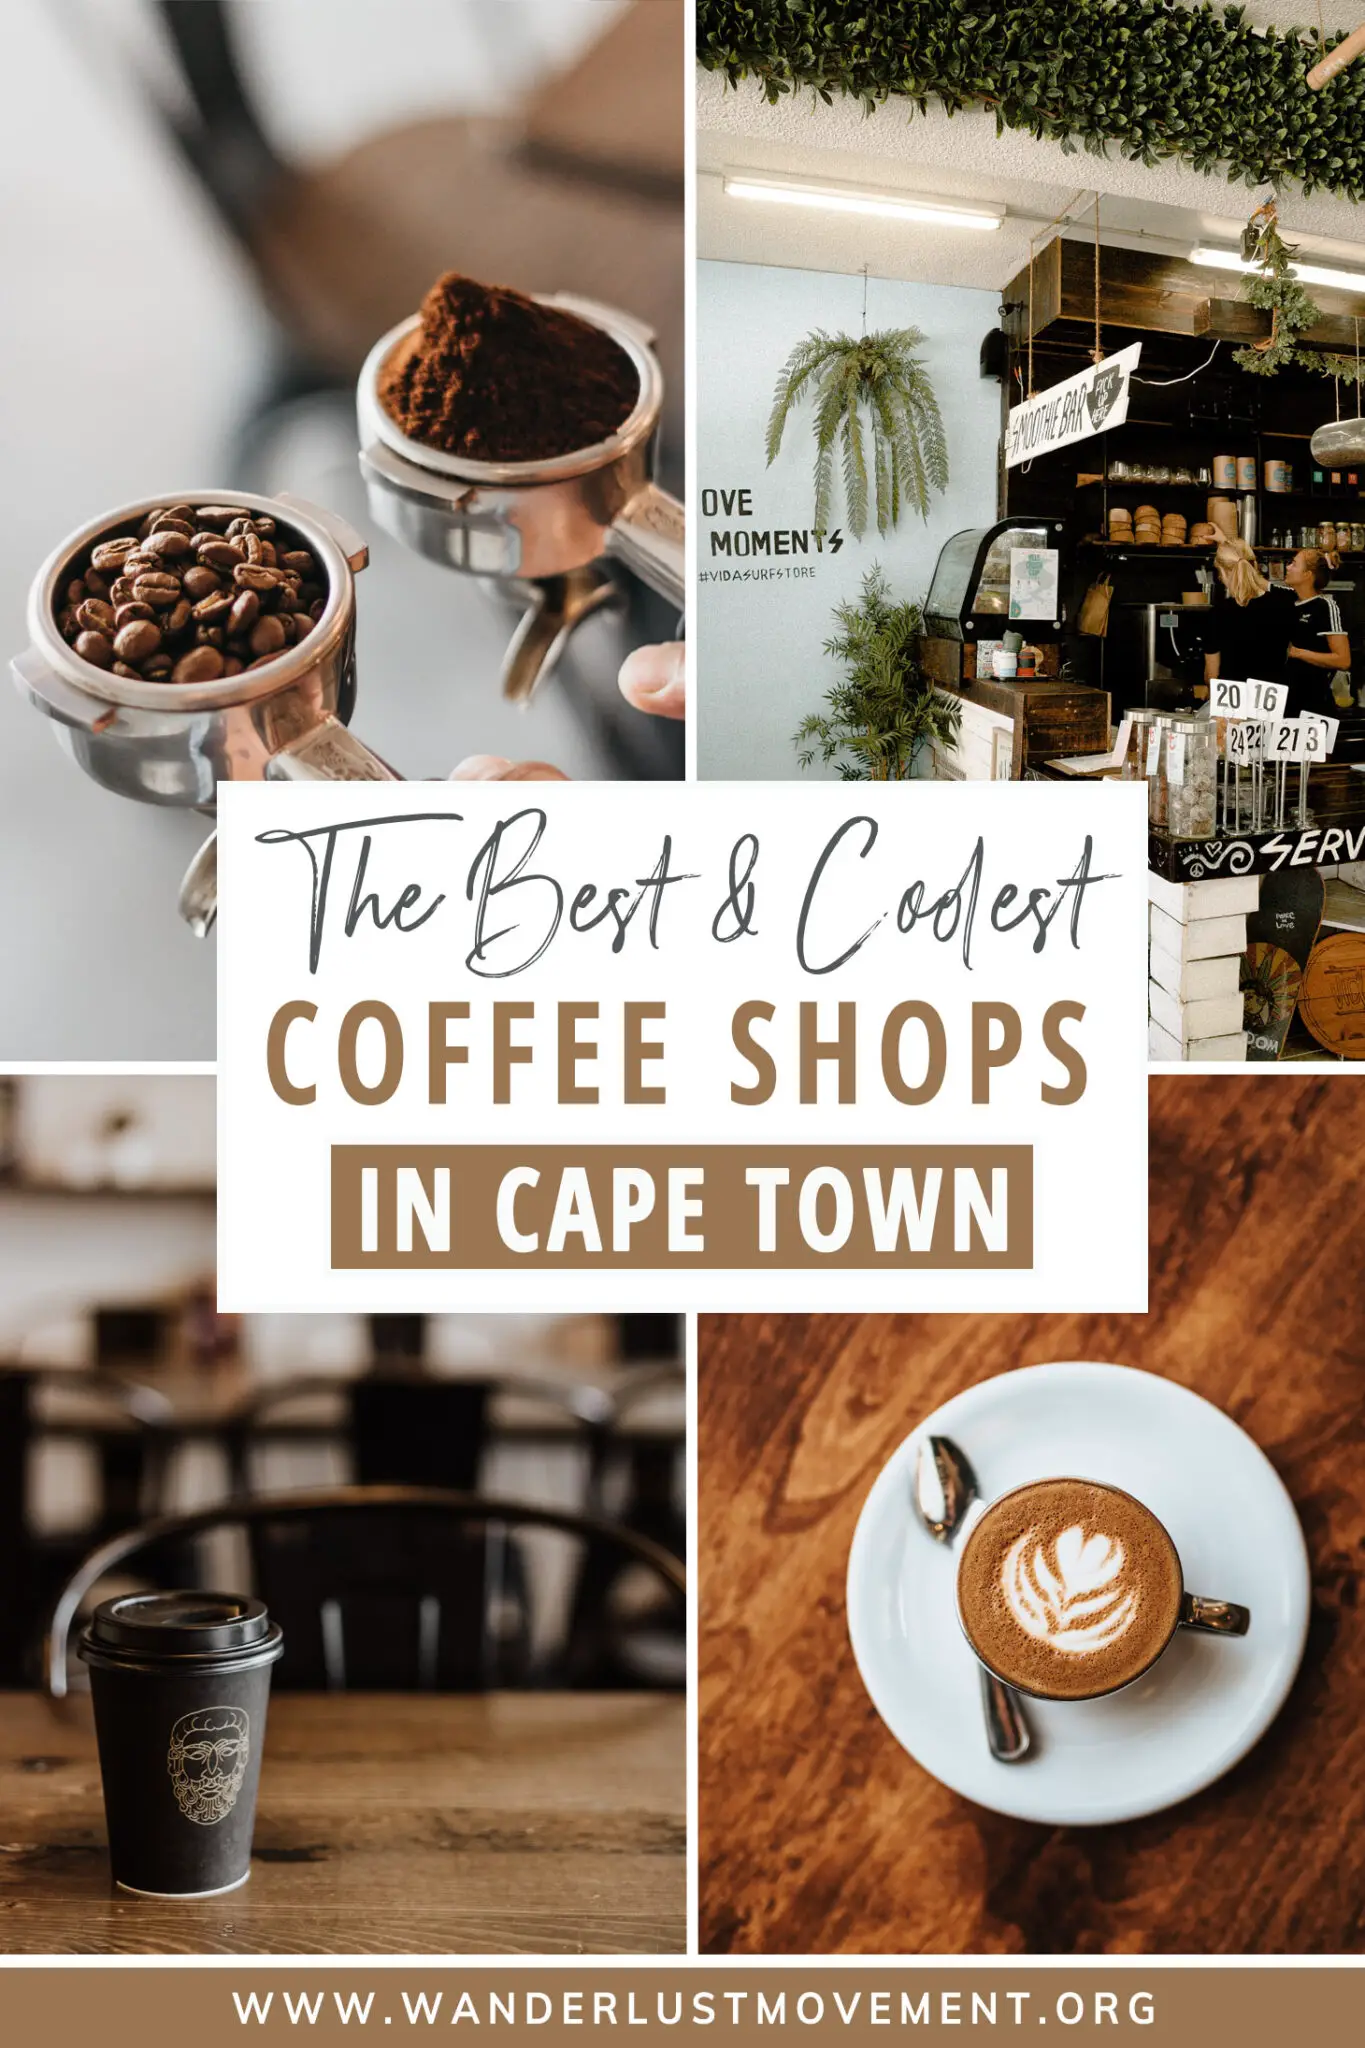 The Coolest & Best Coffee Shops in Cape Town